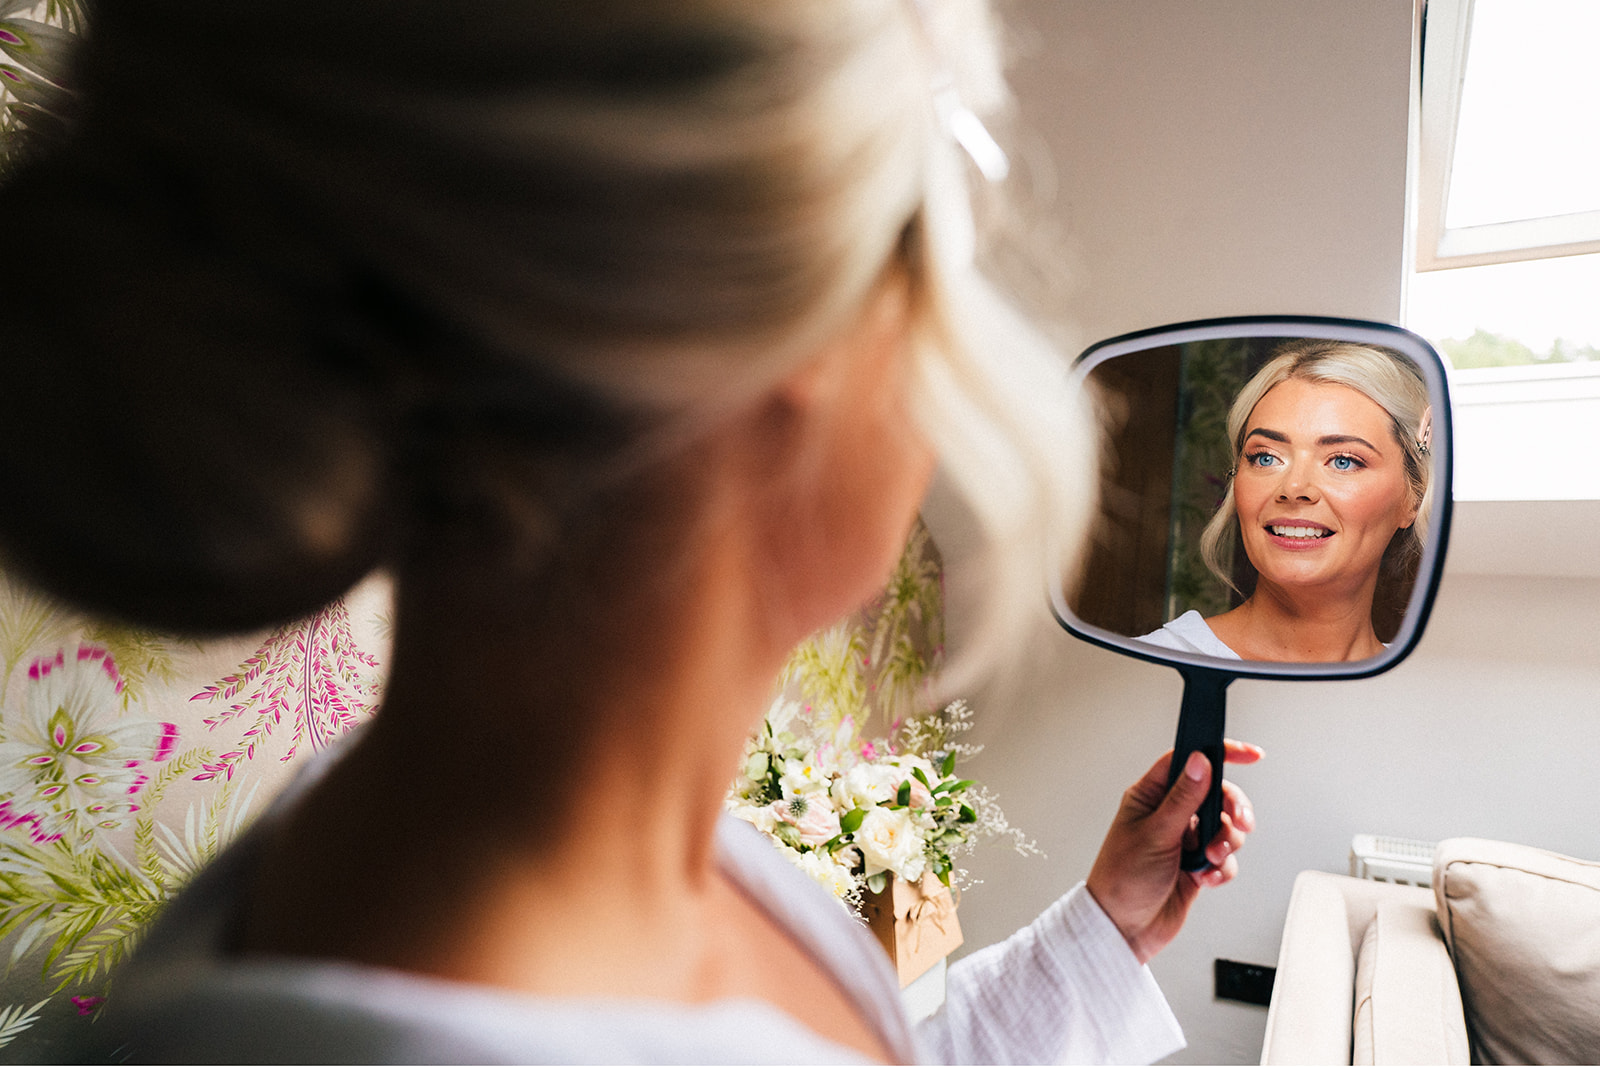 The Chequers Inn Wedding Photography - bride looking at herself in the mirror